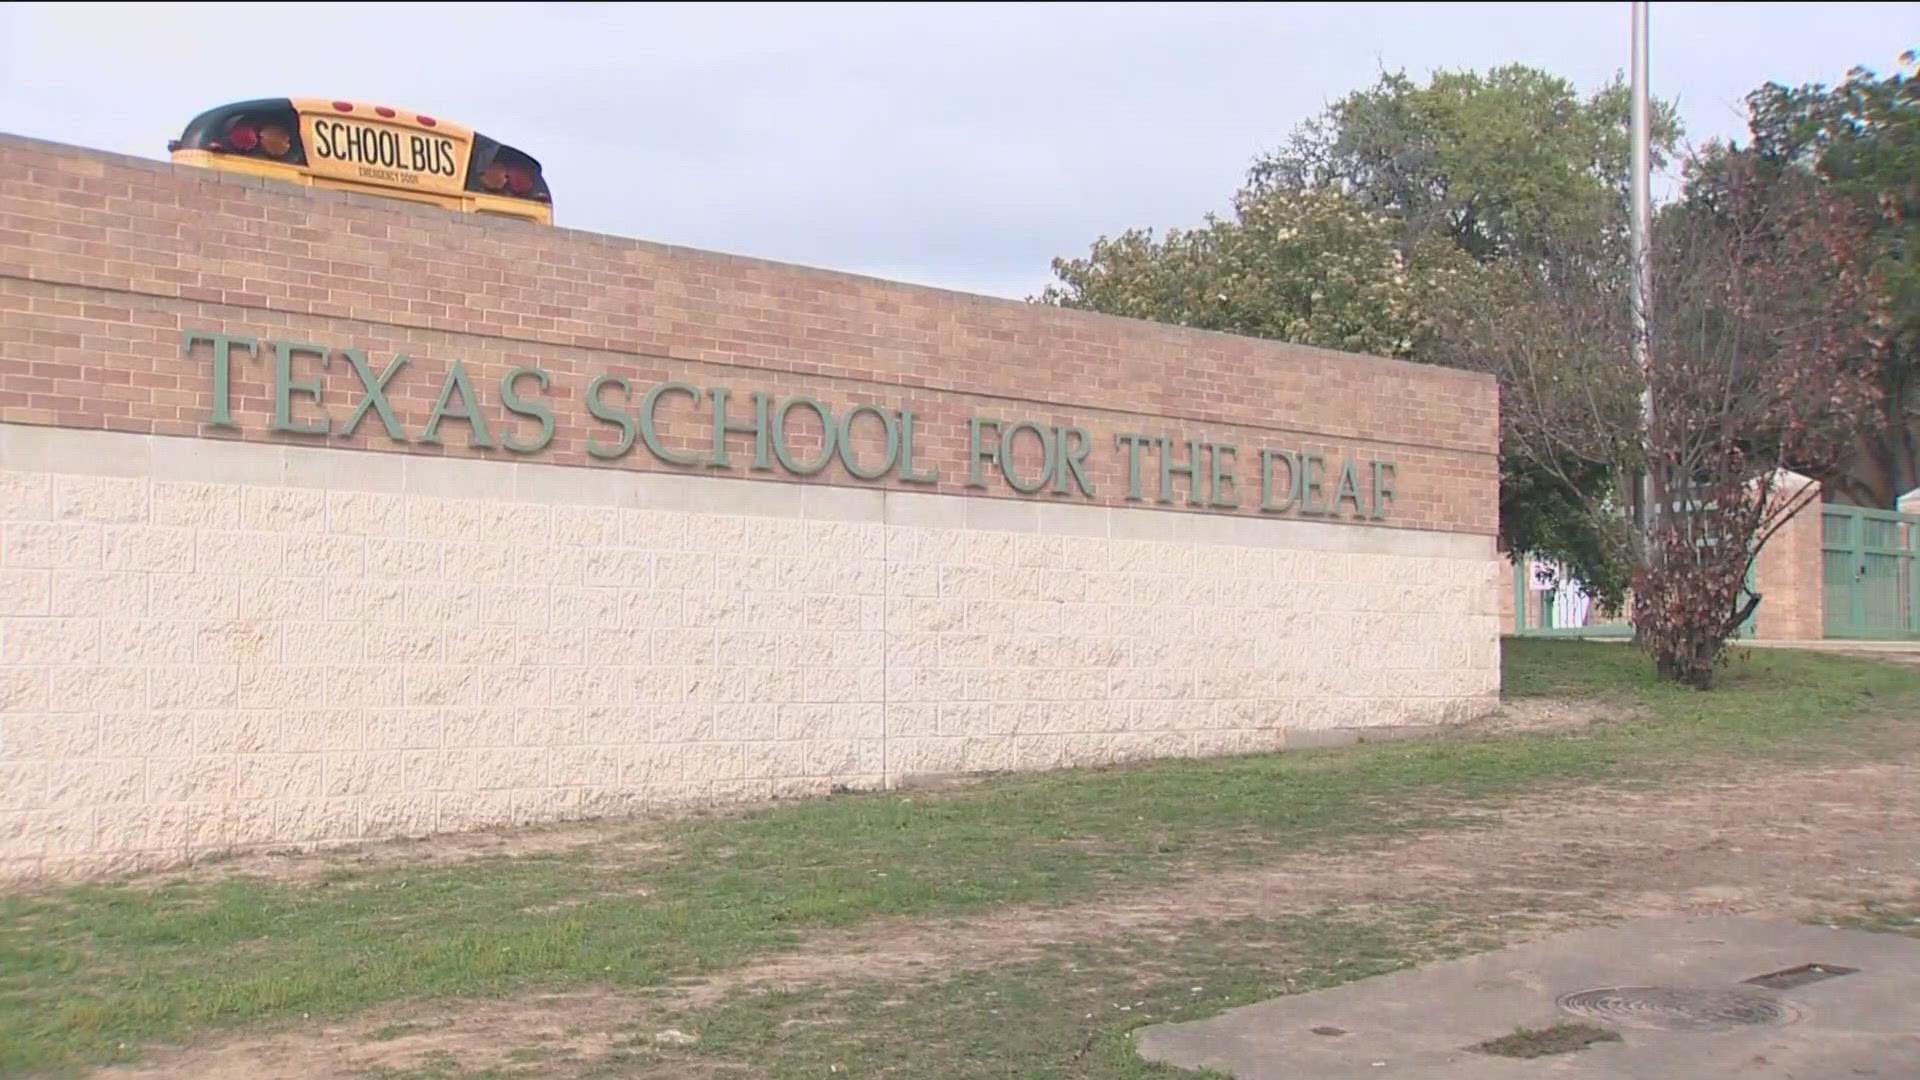 Officials say the Texas School for the Deaf is laying off its interpreters.